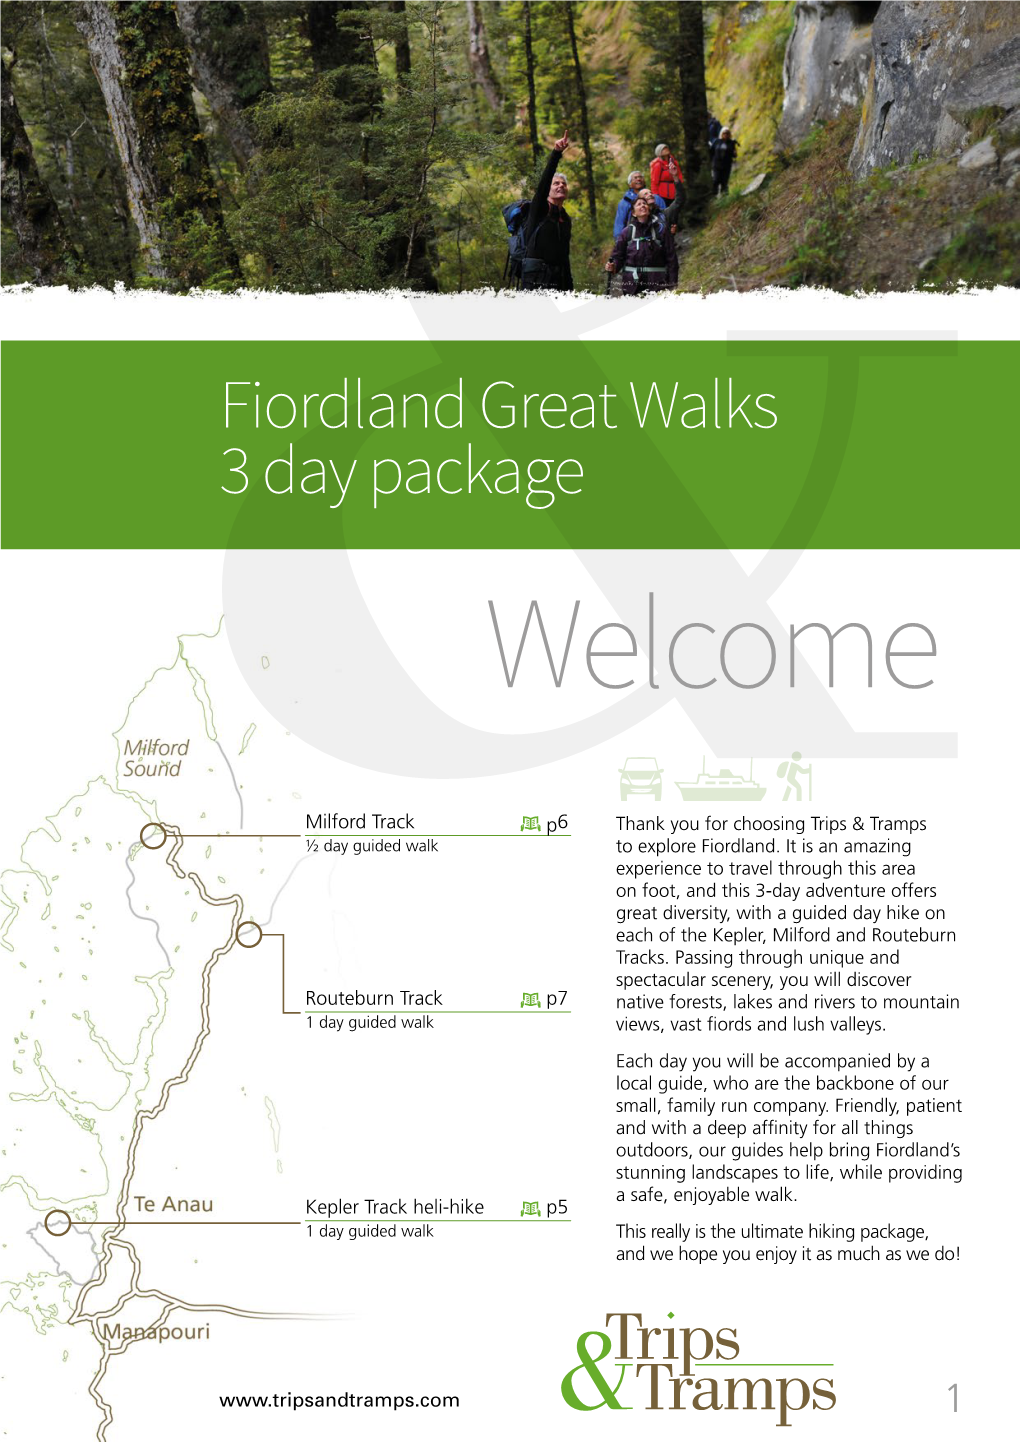 Fiordland Great Walks 3 Day Package Welcome